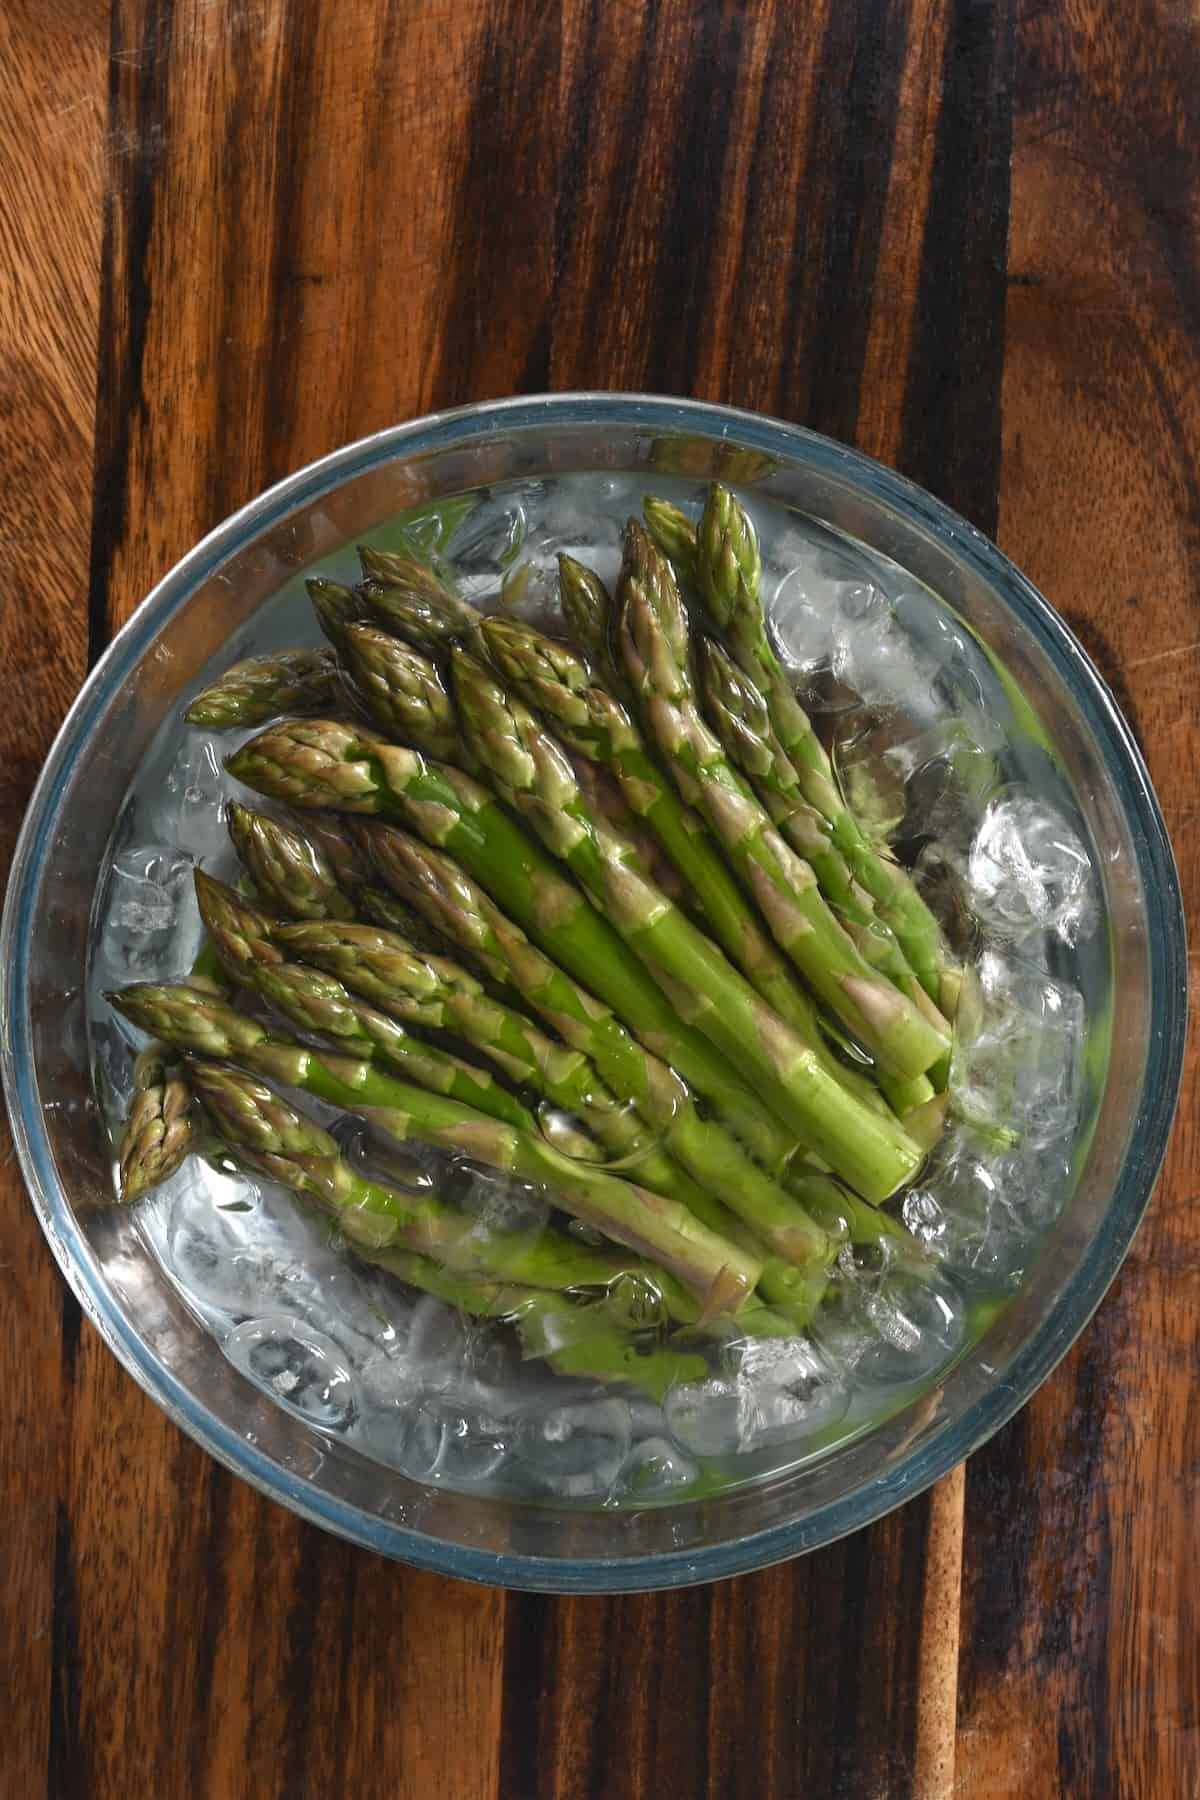 Asparagus spears placed in ice water